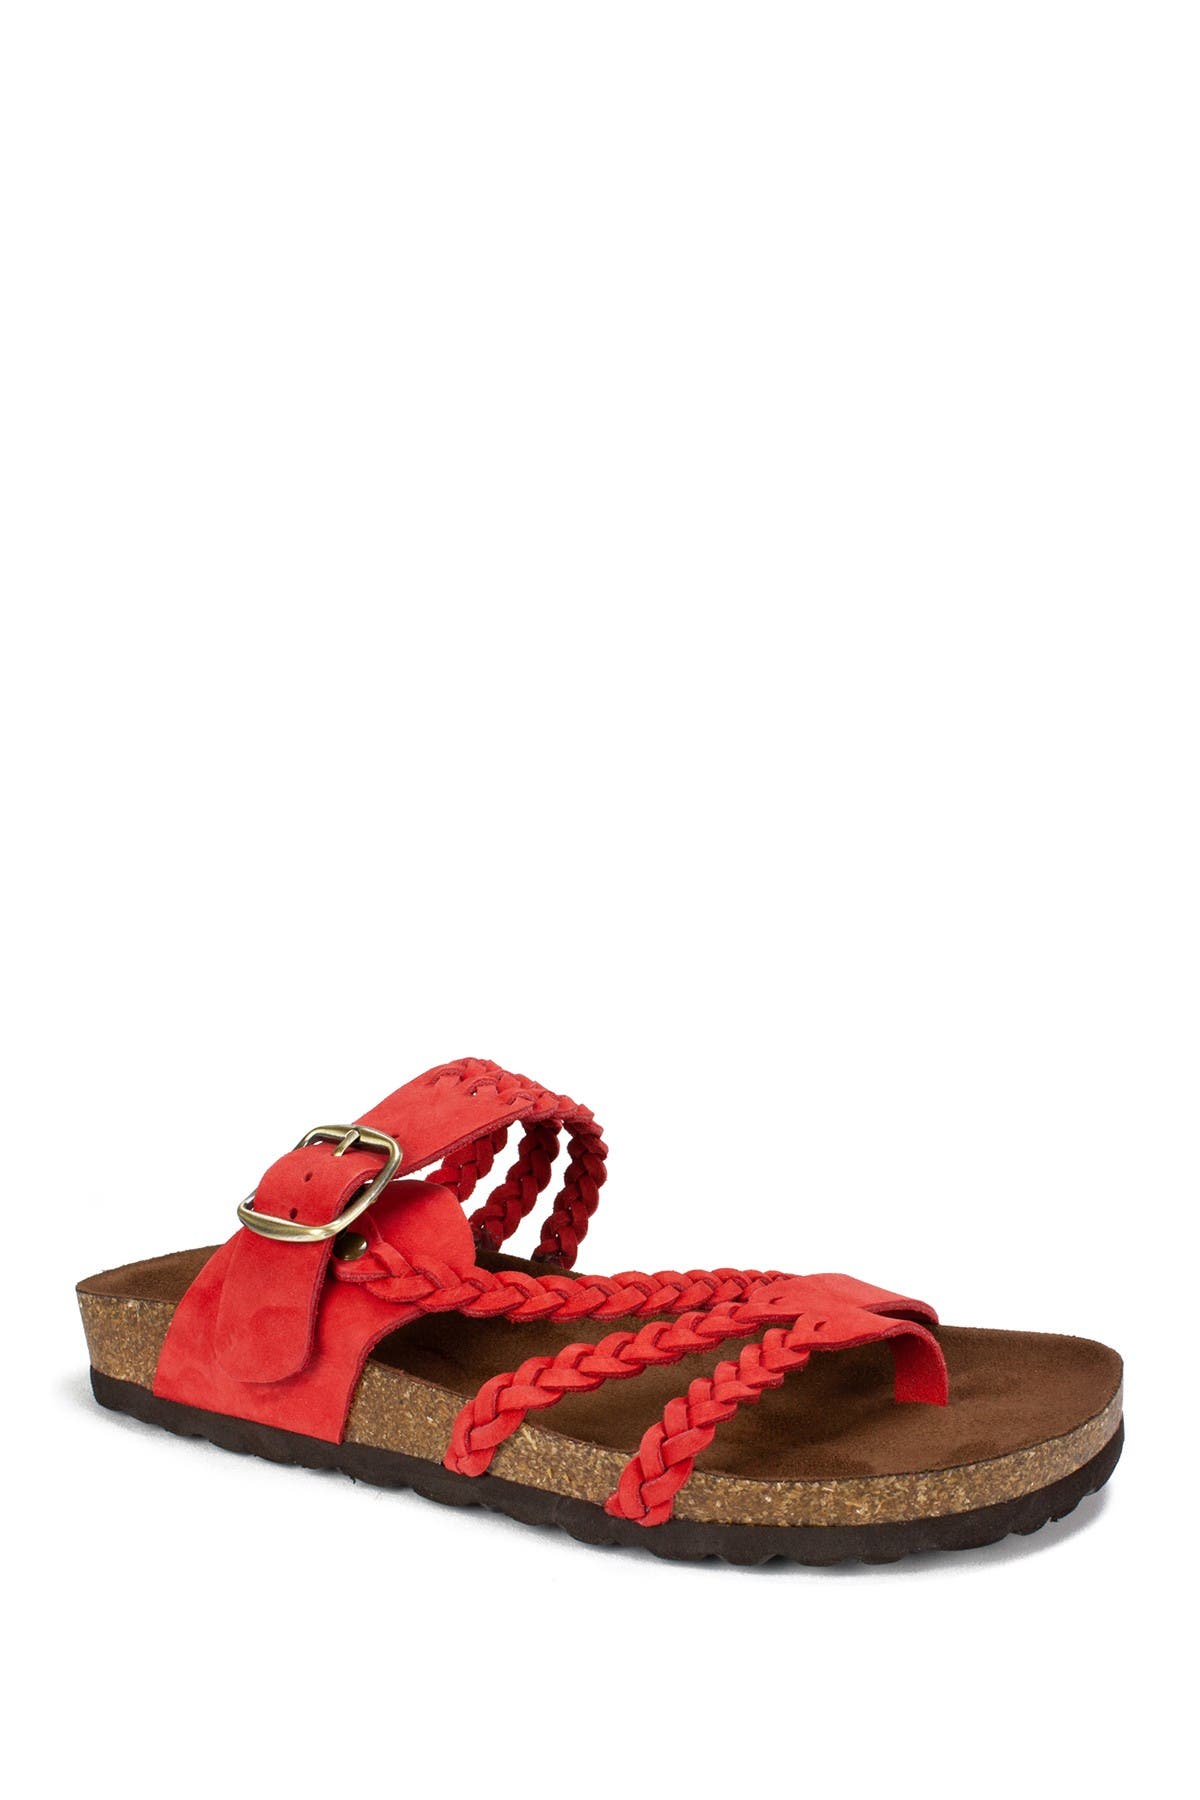 White Mountain Footwear Hayleigh Braided Leather Footbed Sandal In Red/nubuck